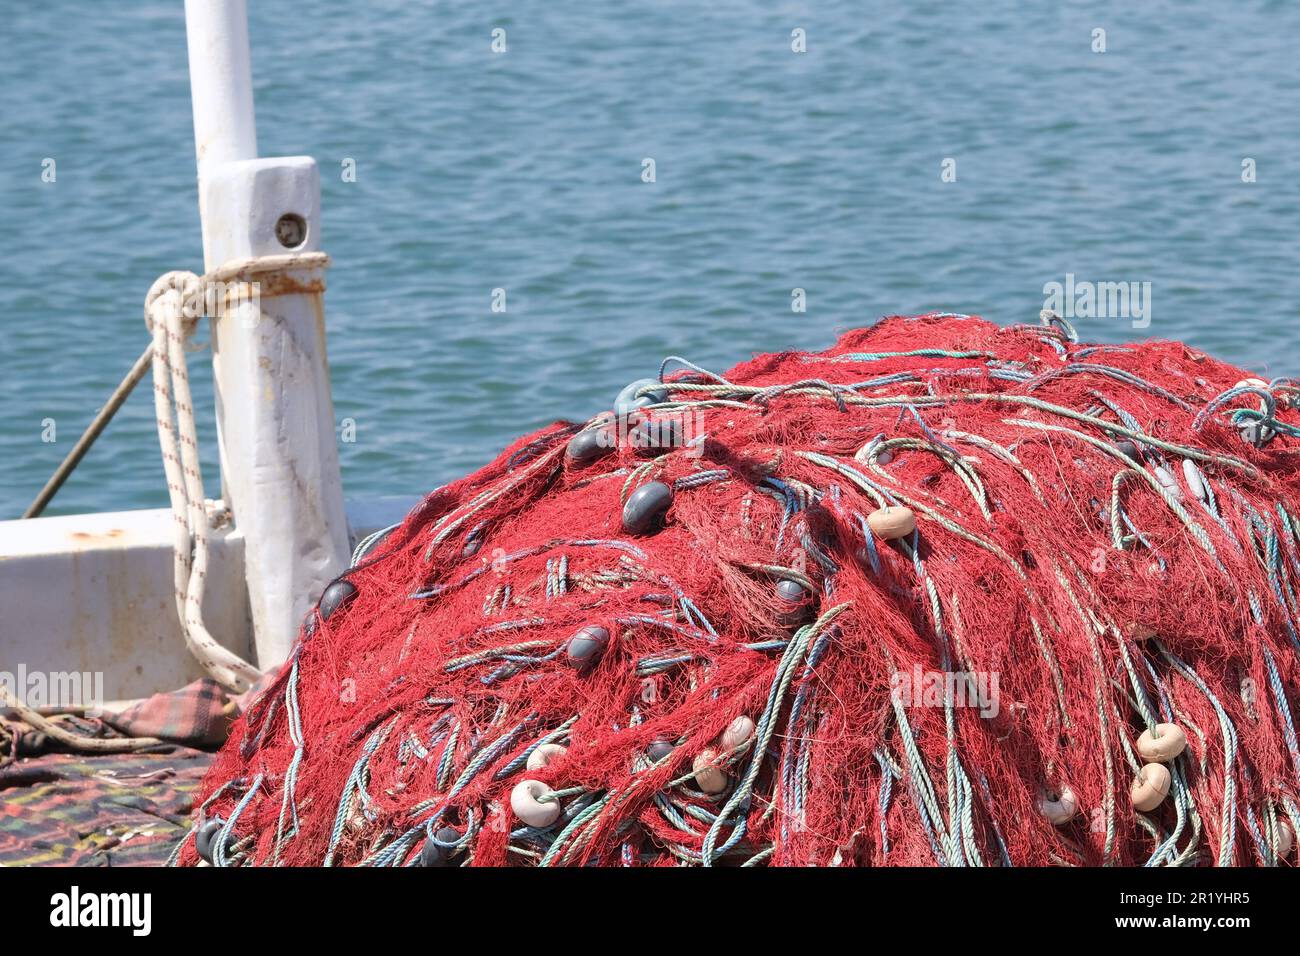 https://c8.alamy.com/comp/2R1YHR5/mixture-of-colorful-fishing-nets-floats-and-ropes-with-isolated-trawler-boat-background-fisherman-material-background-open-space-area-2R1YHR5.jpg